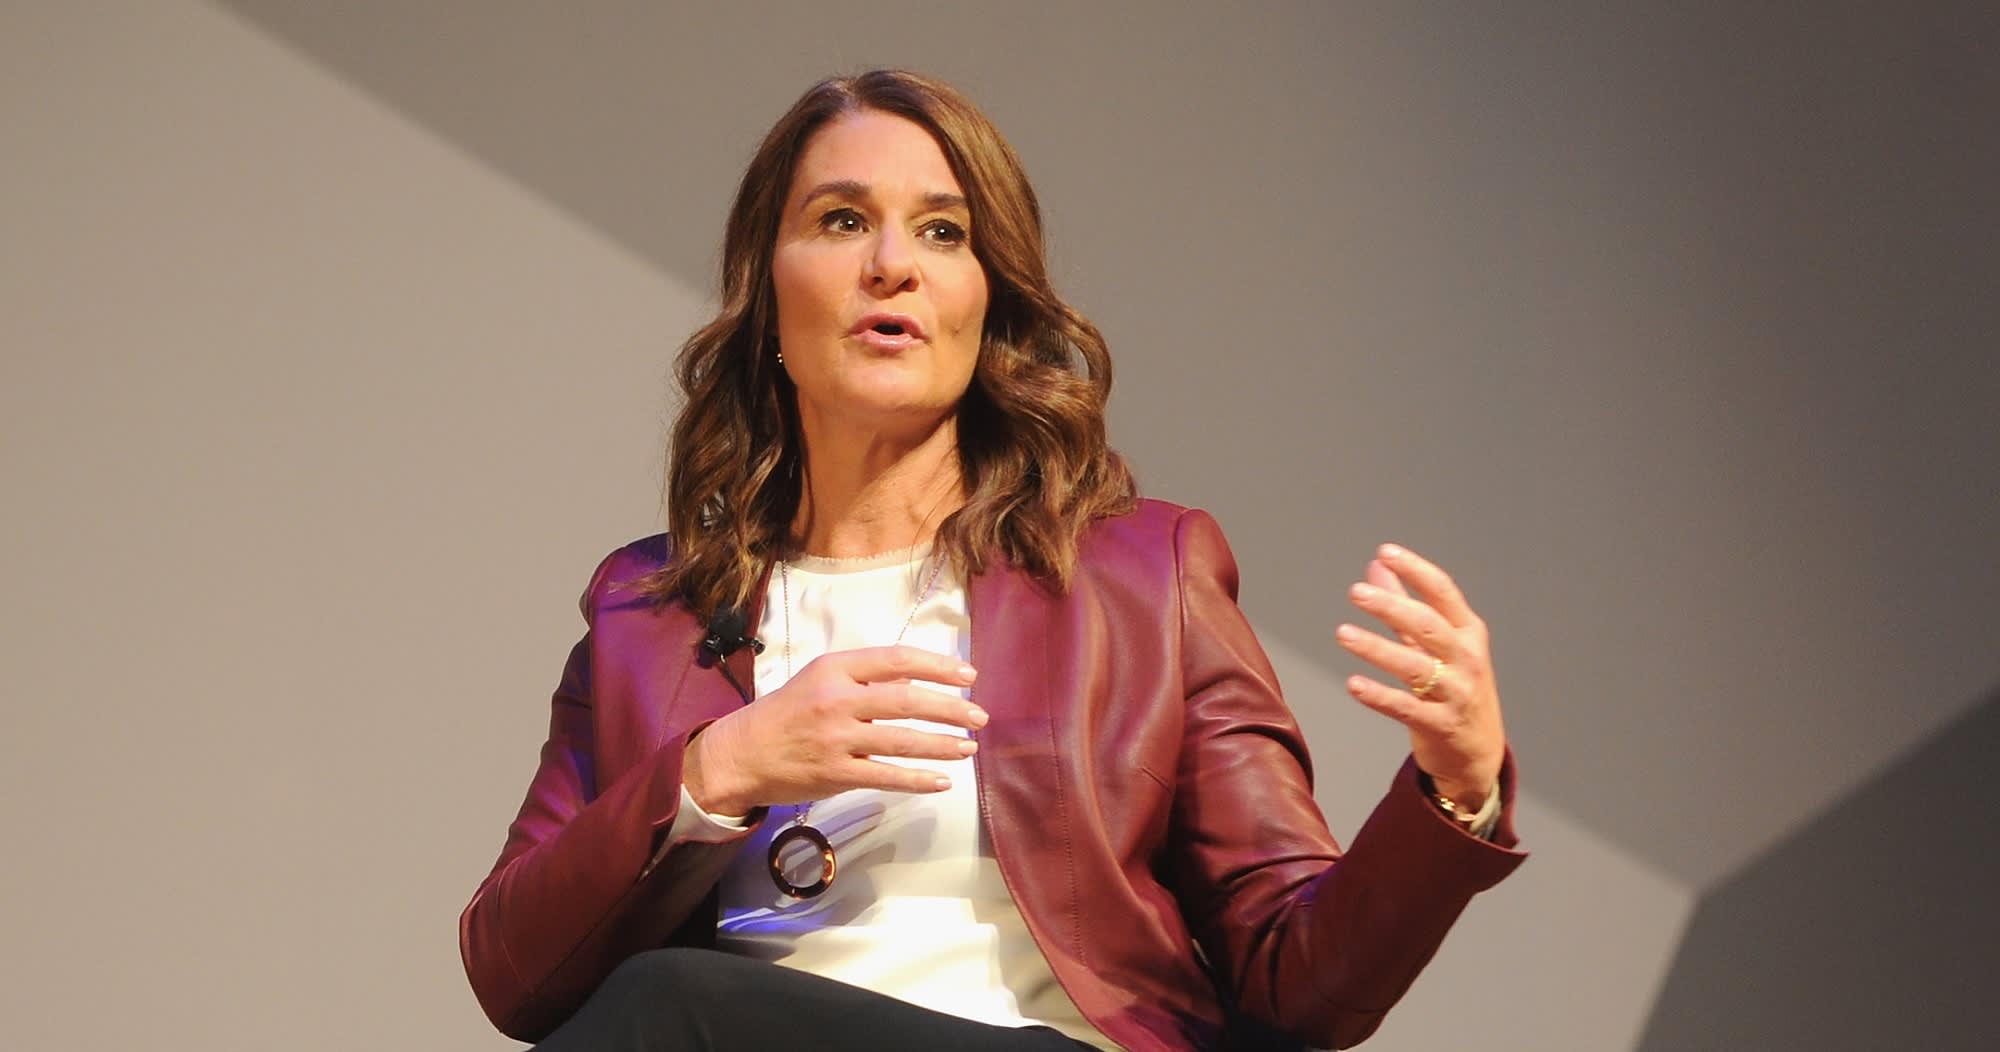 Melinda Gates is asking Congress to grant paid sick leave for the family to help the economy